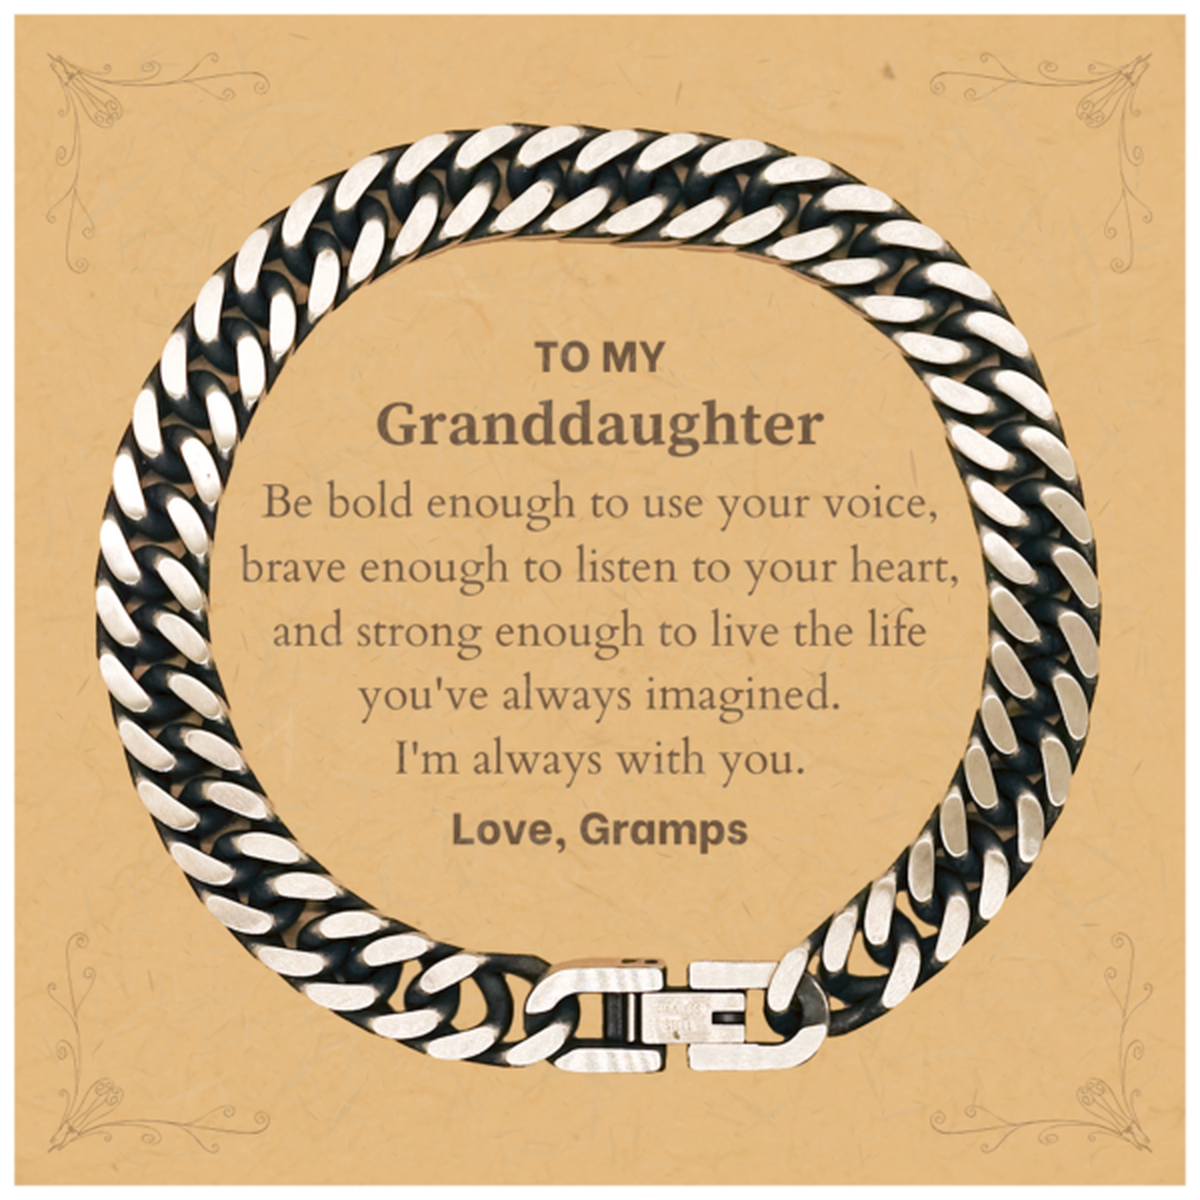 Keepsake Granddaughter Cuban Link Chain Bracelet Gift Idea Graduation Christmas Birthday Granddaughter from Gramps, Granddaughter Be bold enough to use your voice, brave enough to listen to your heart. Love, Gramps